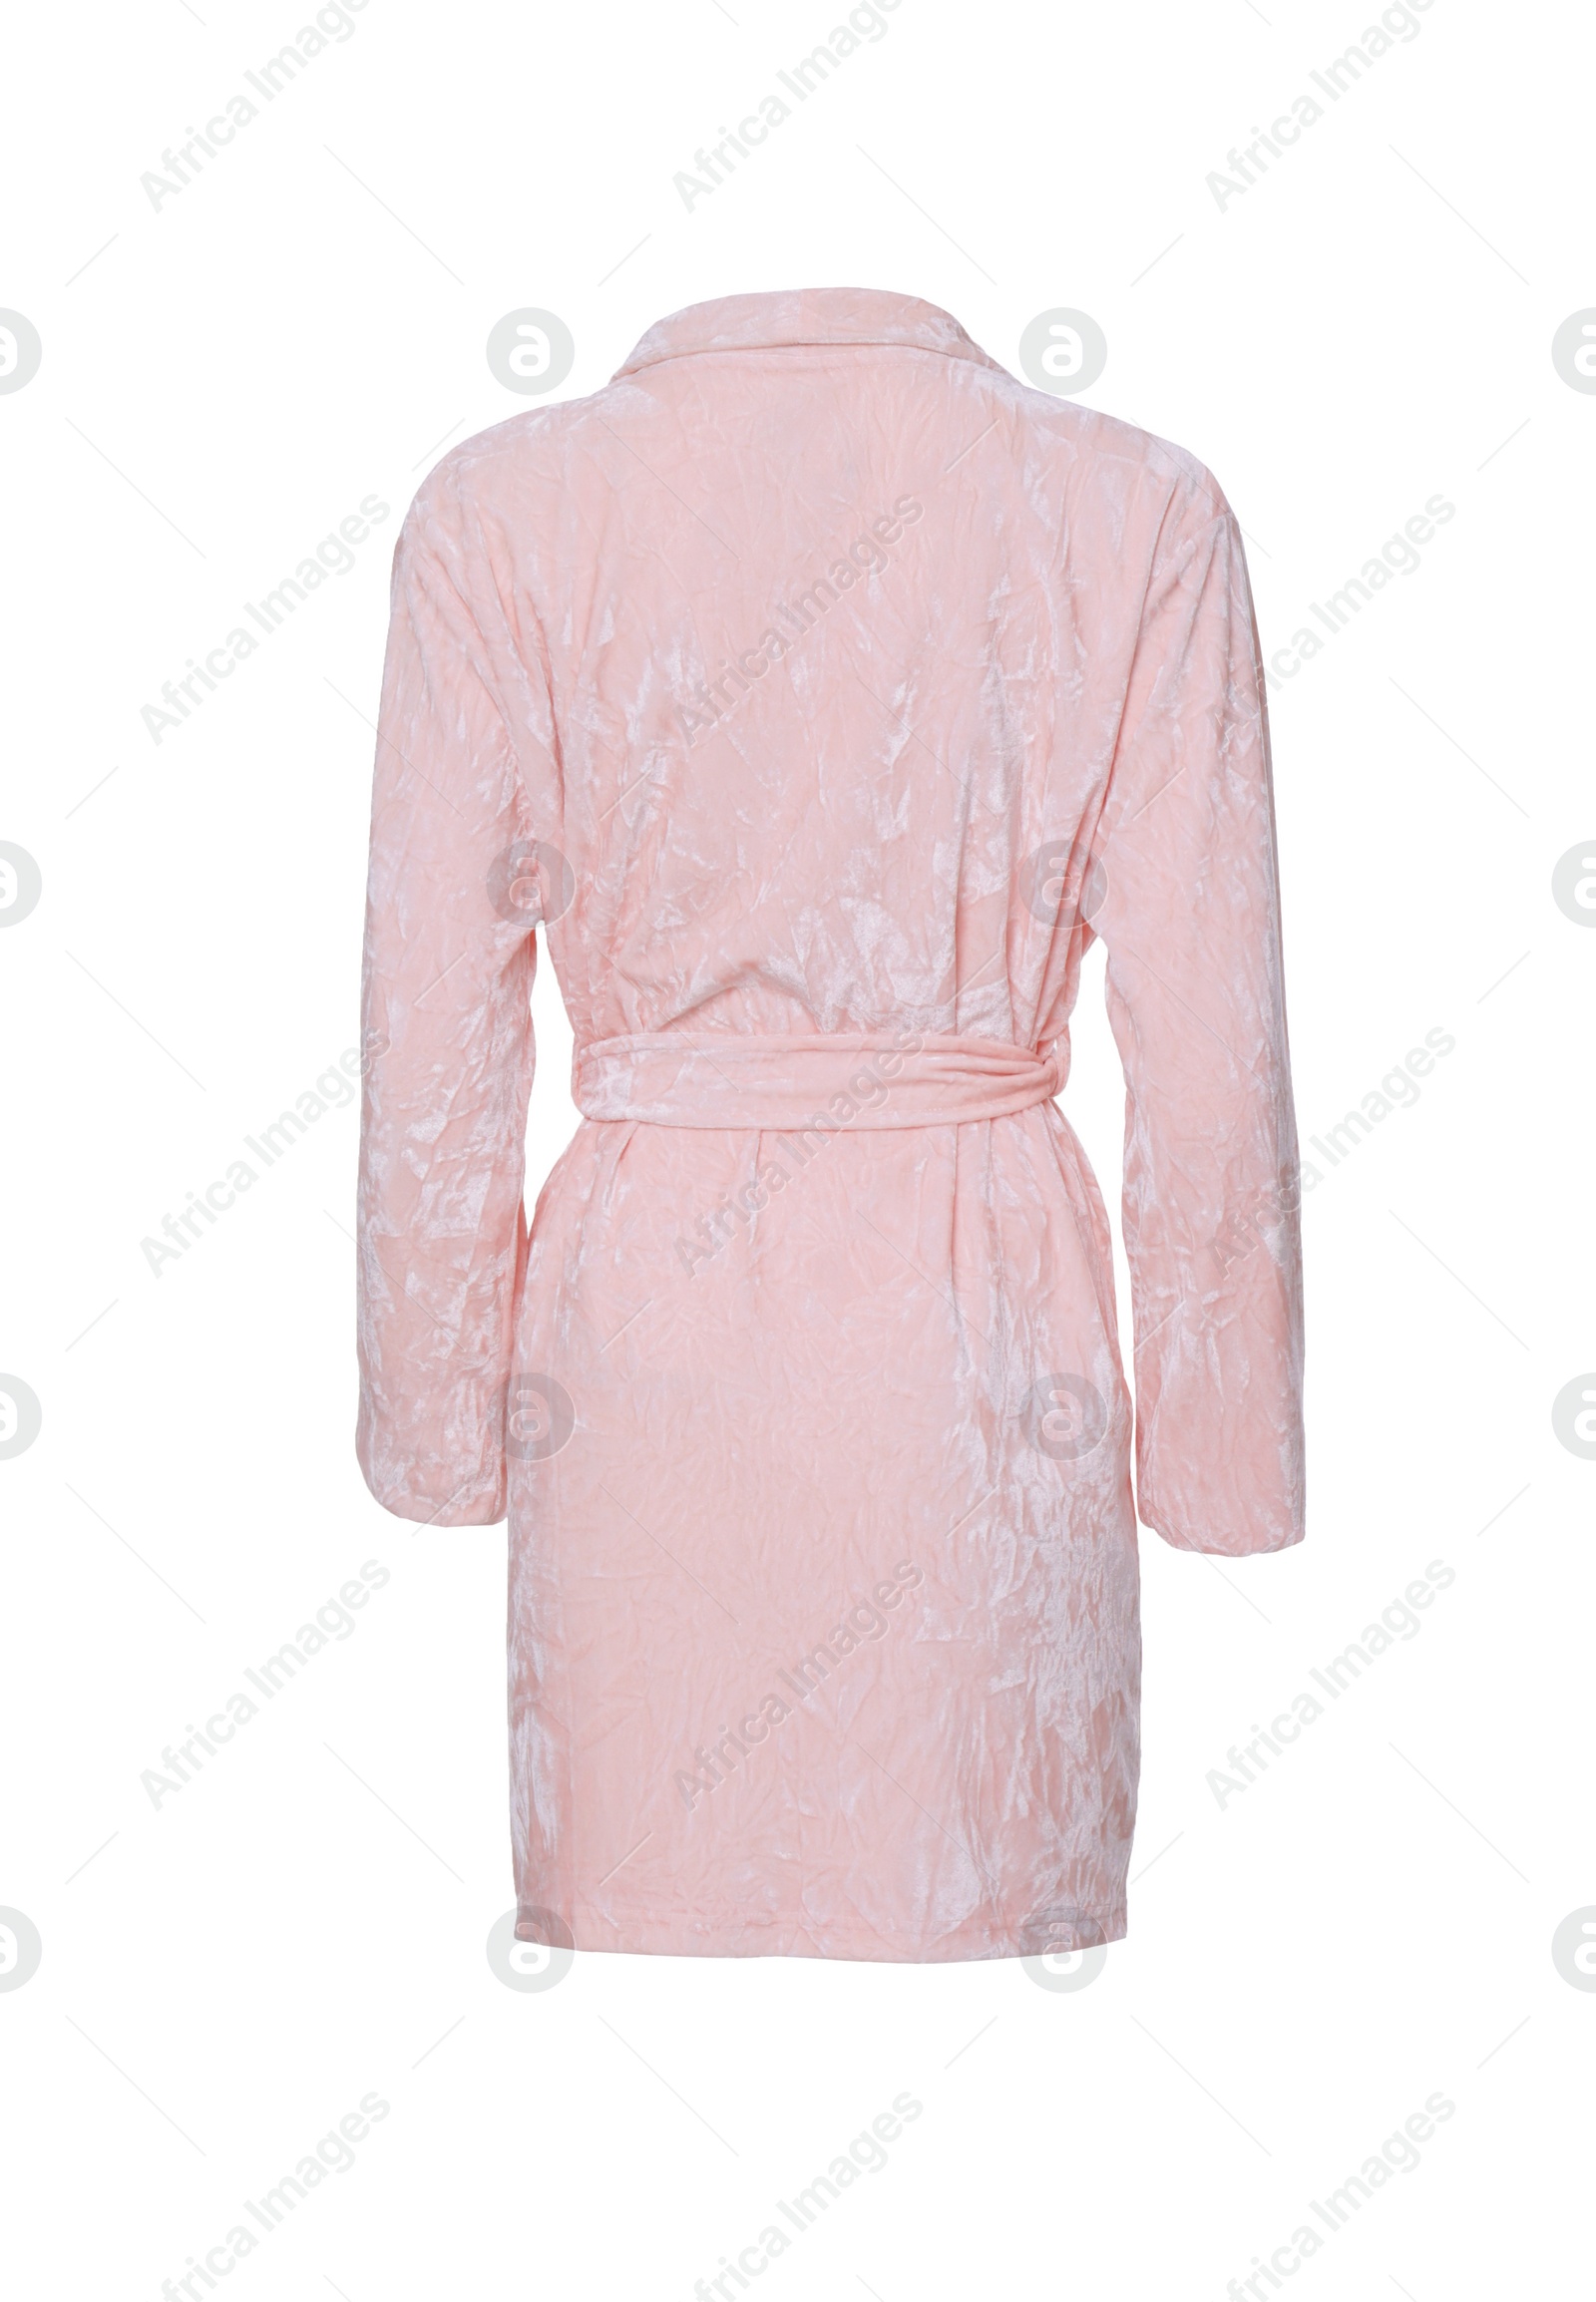 Image of Soft pink velour bathrobe isolated on white, back view